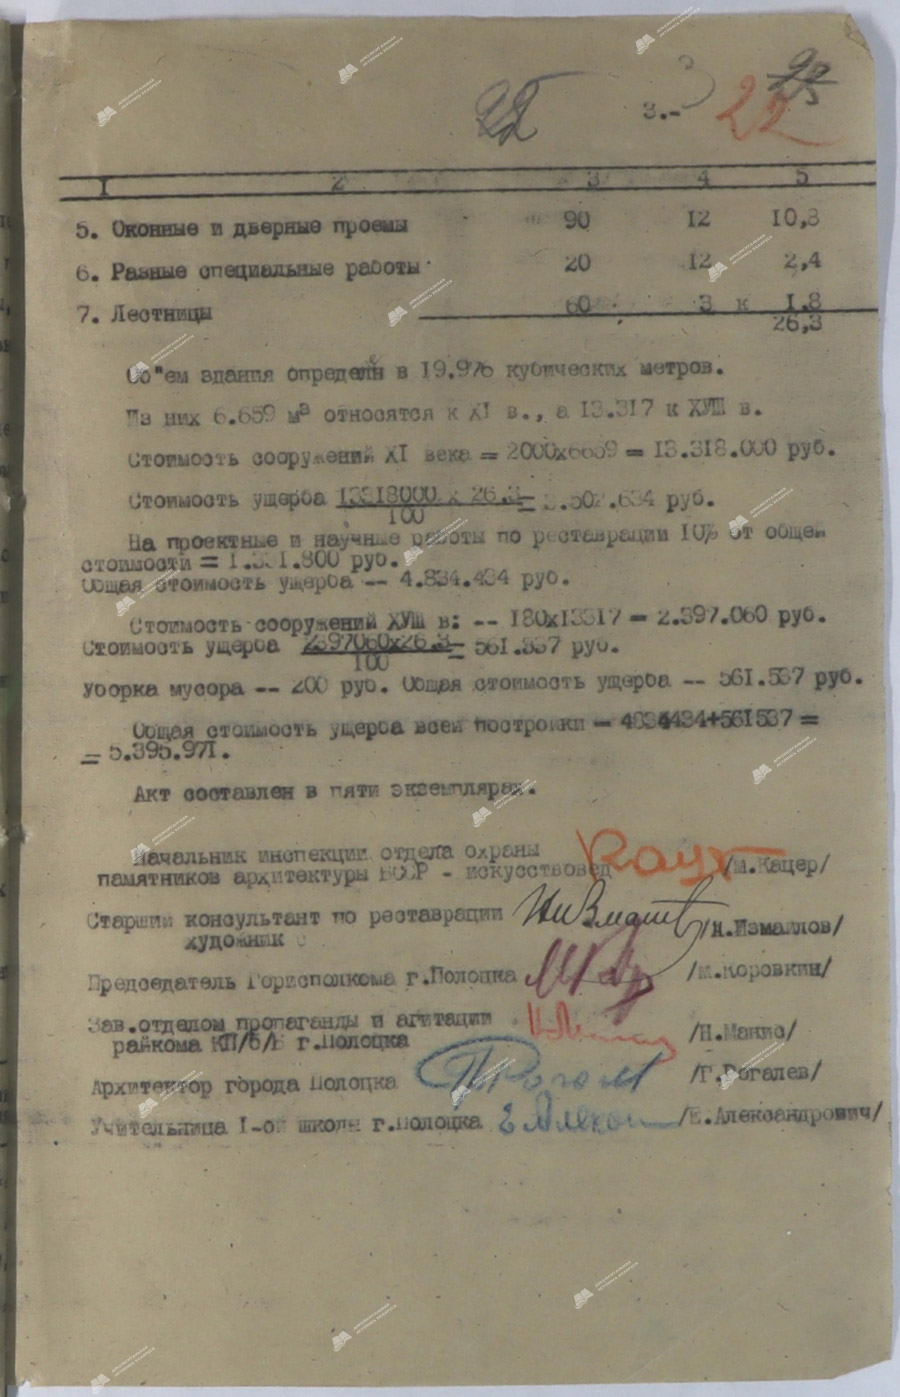 Acts of the commission of the Polotsk City Executive Committee to establish the damage caused by the Nazi invaders to the architectural monuments of Polotsk-с. 4